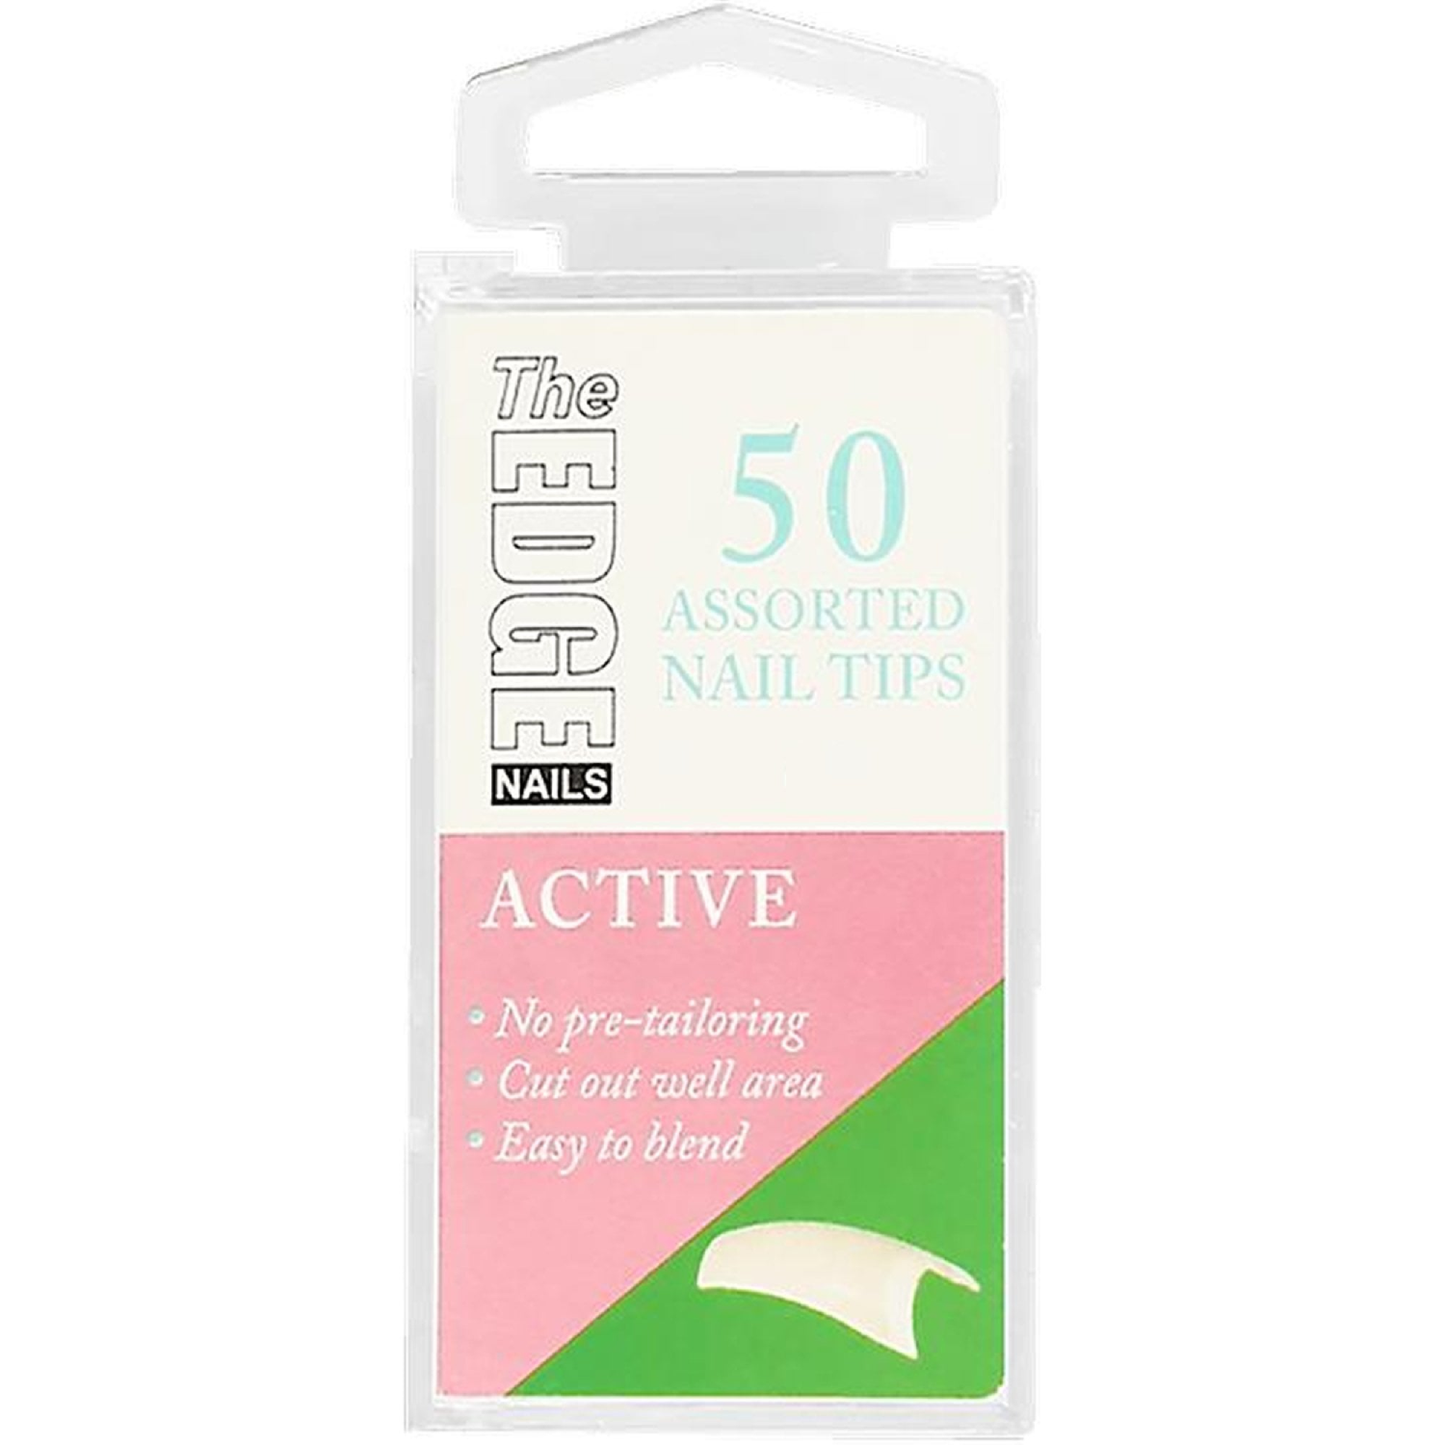 The Edge Active Nail Tips - Boxes of 50 Tips - Size 3 (SHOP)